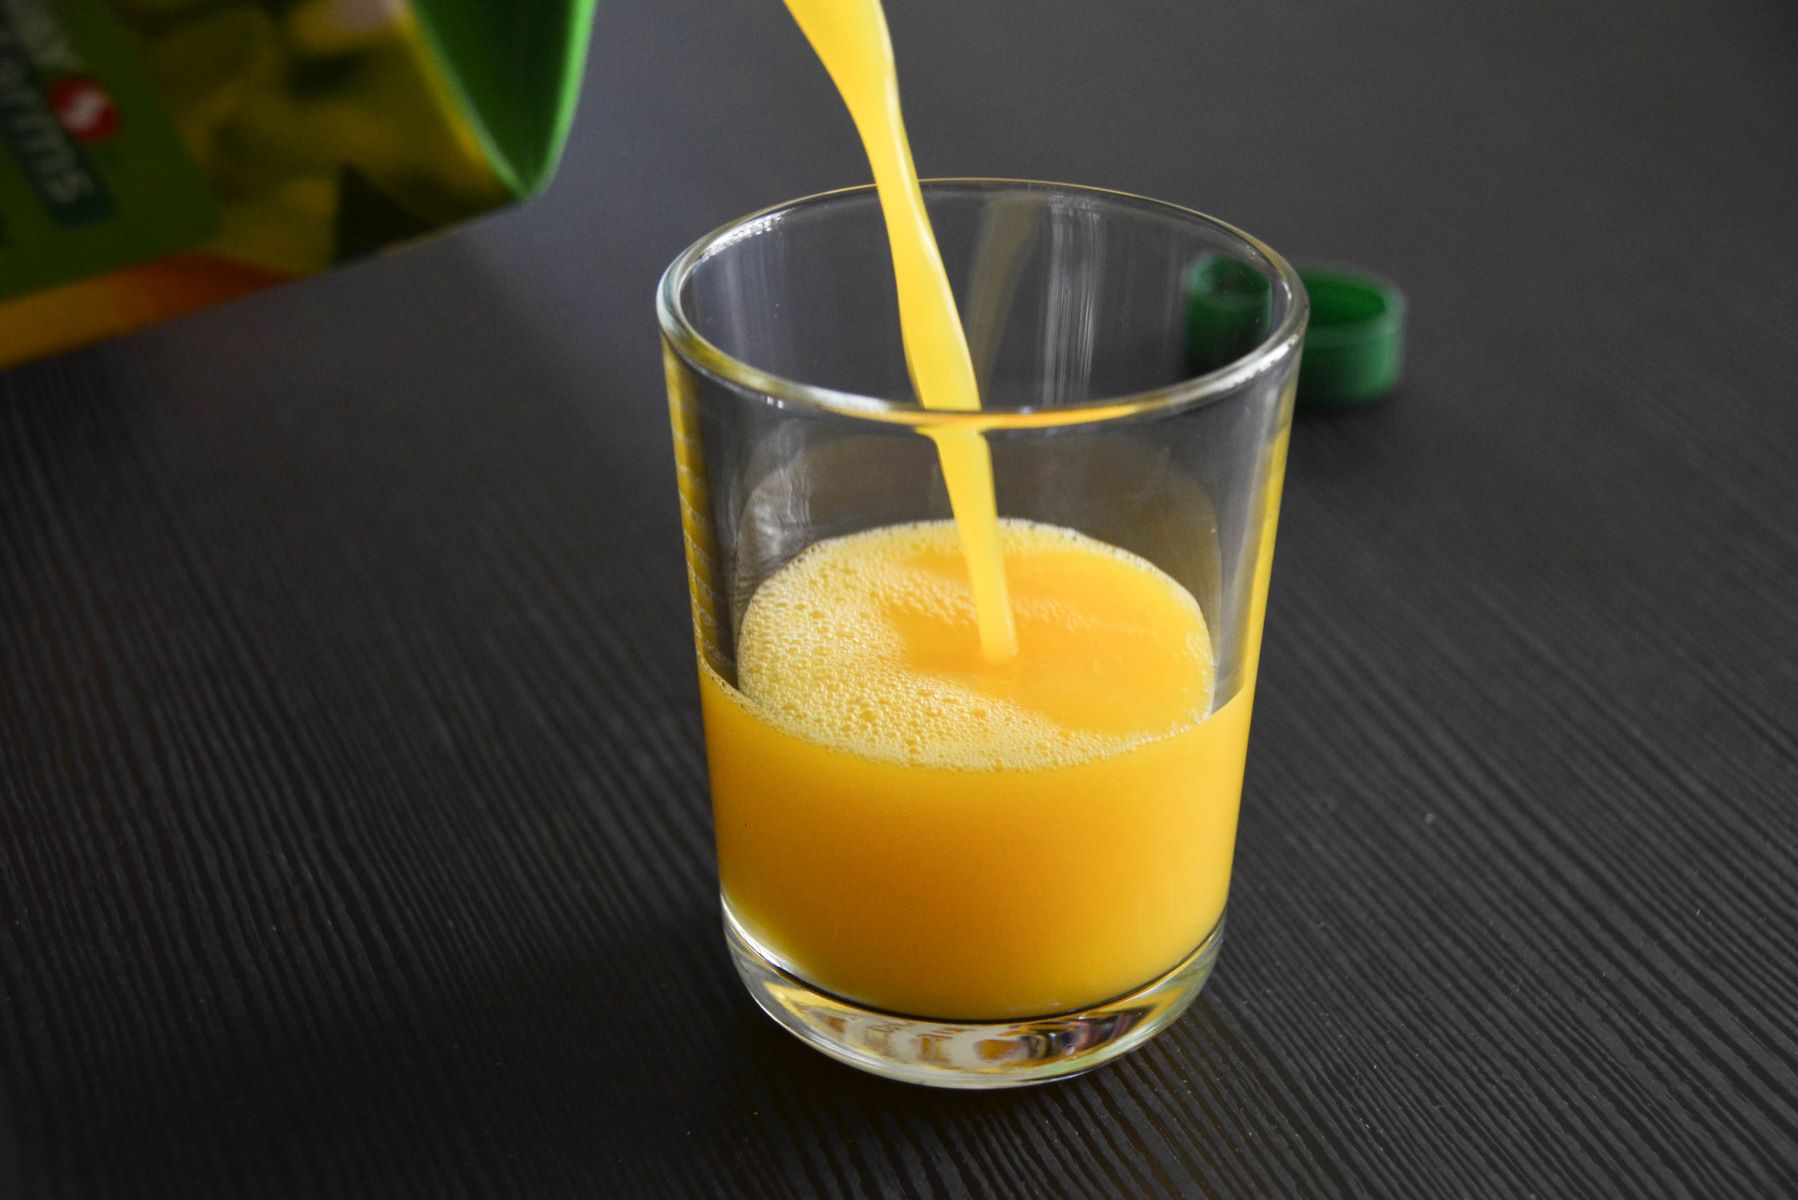 You Won't Believe What Happened To This Unopened Orange Juice Left Out Overnight!